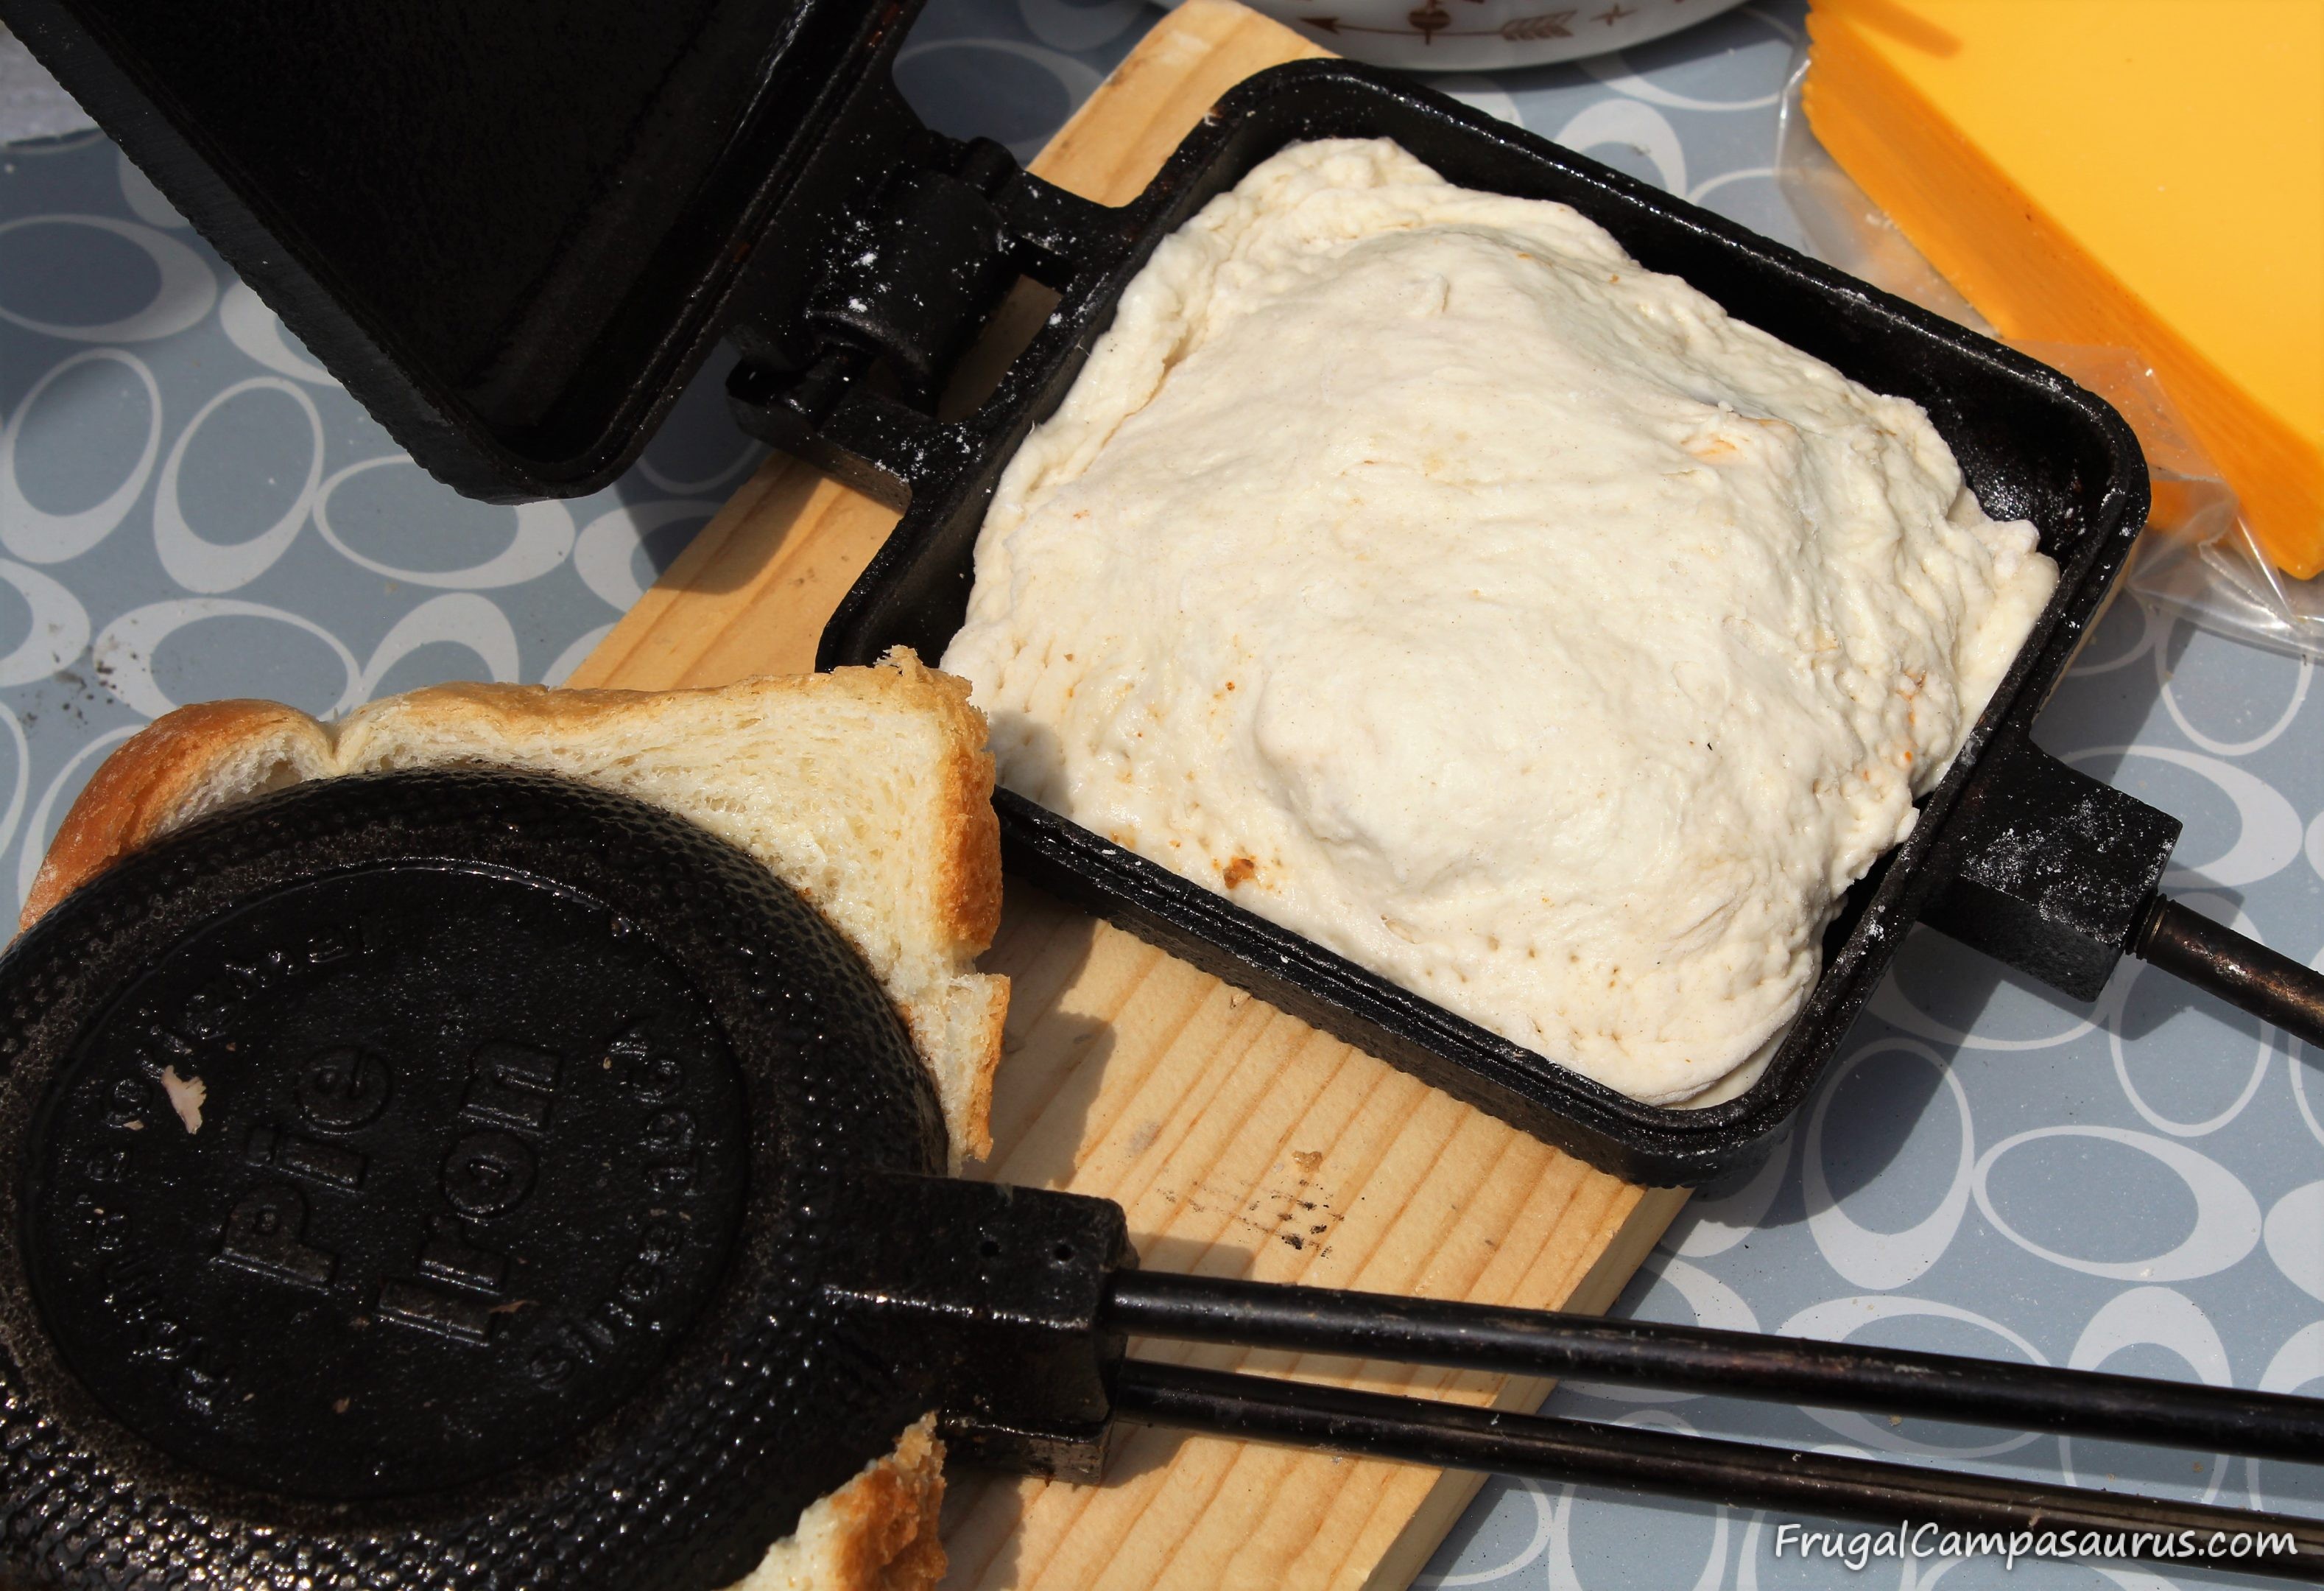 Gear Review: Pie Irons - Camping Answer